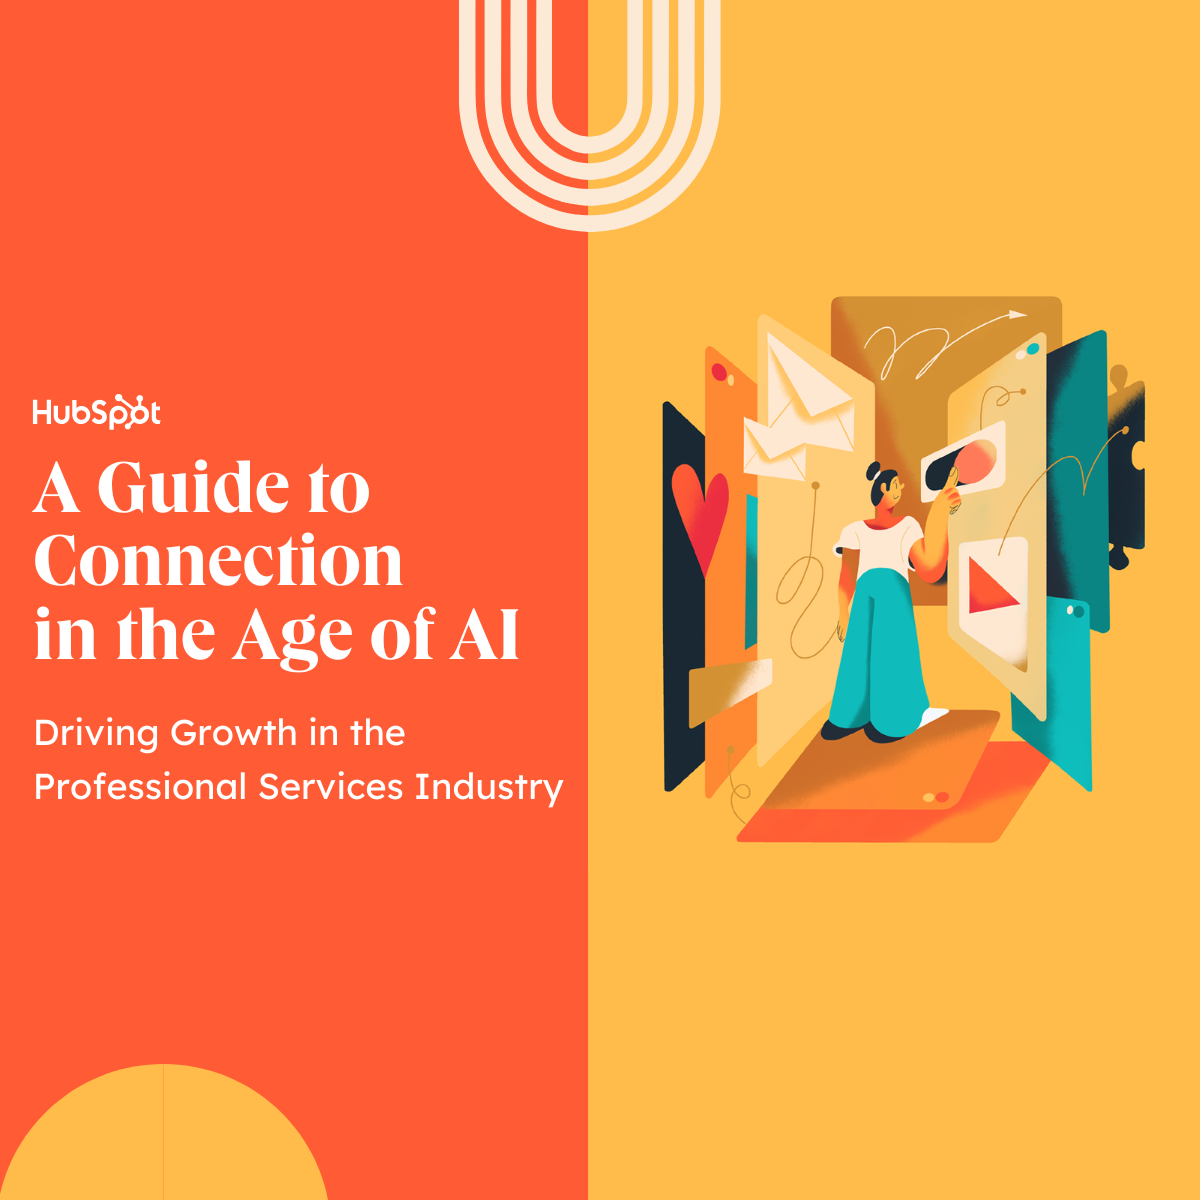 A Guide to Connection in the Age of AI